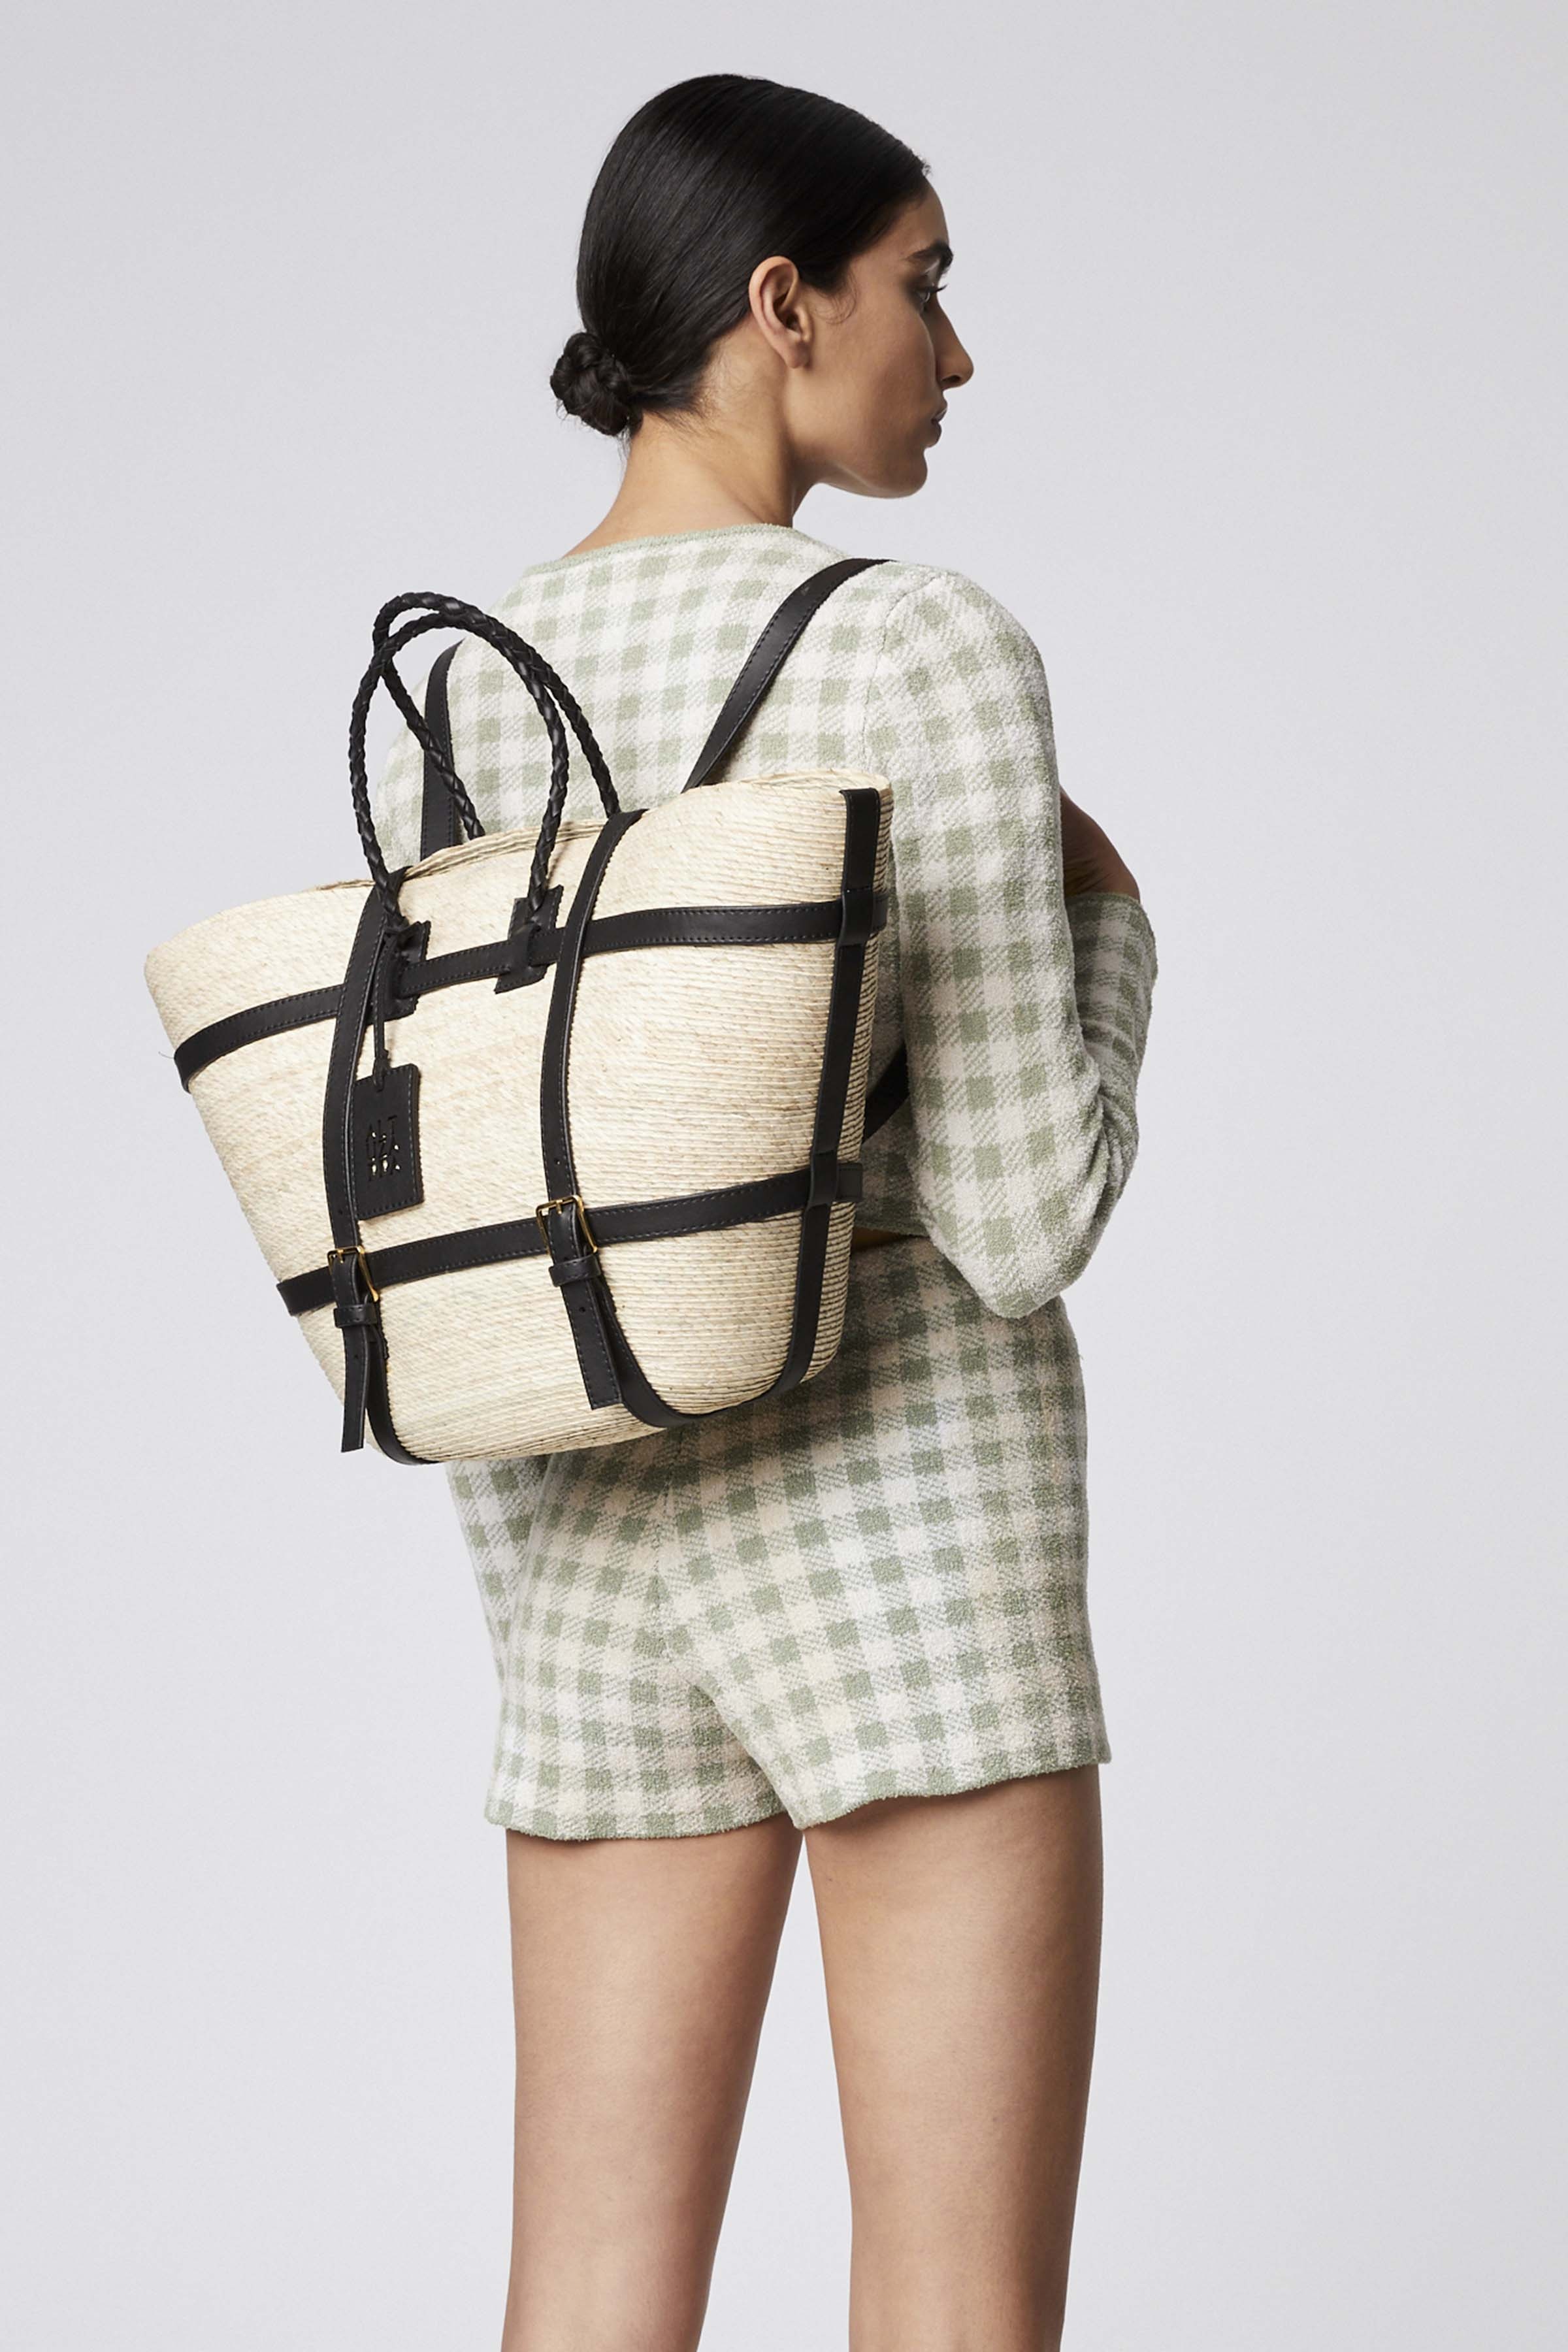 'WATERMILL' BACKPACK - 3